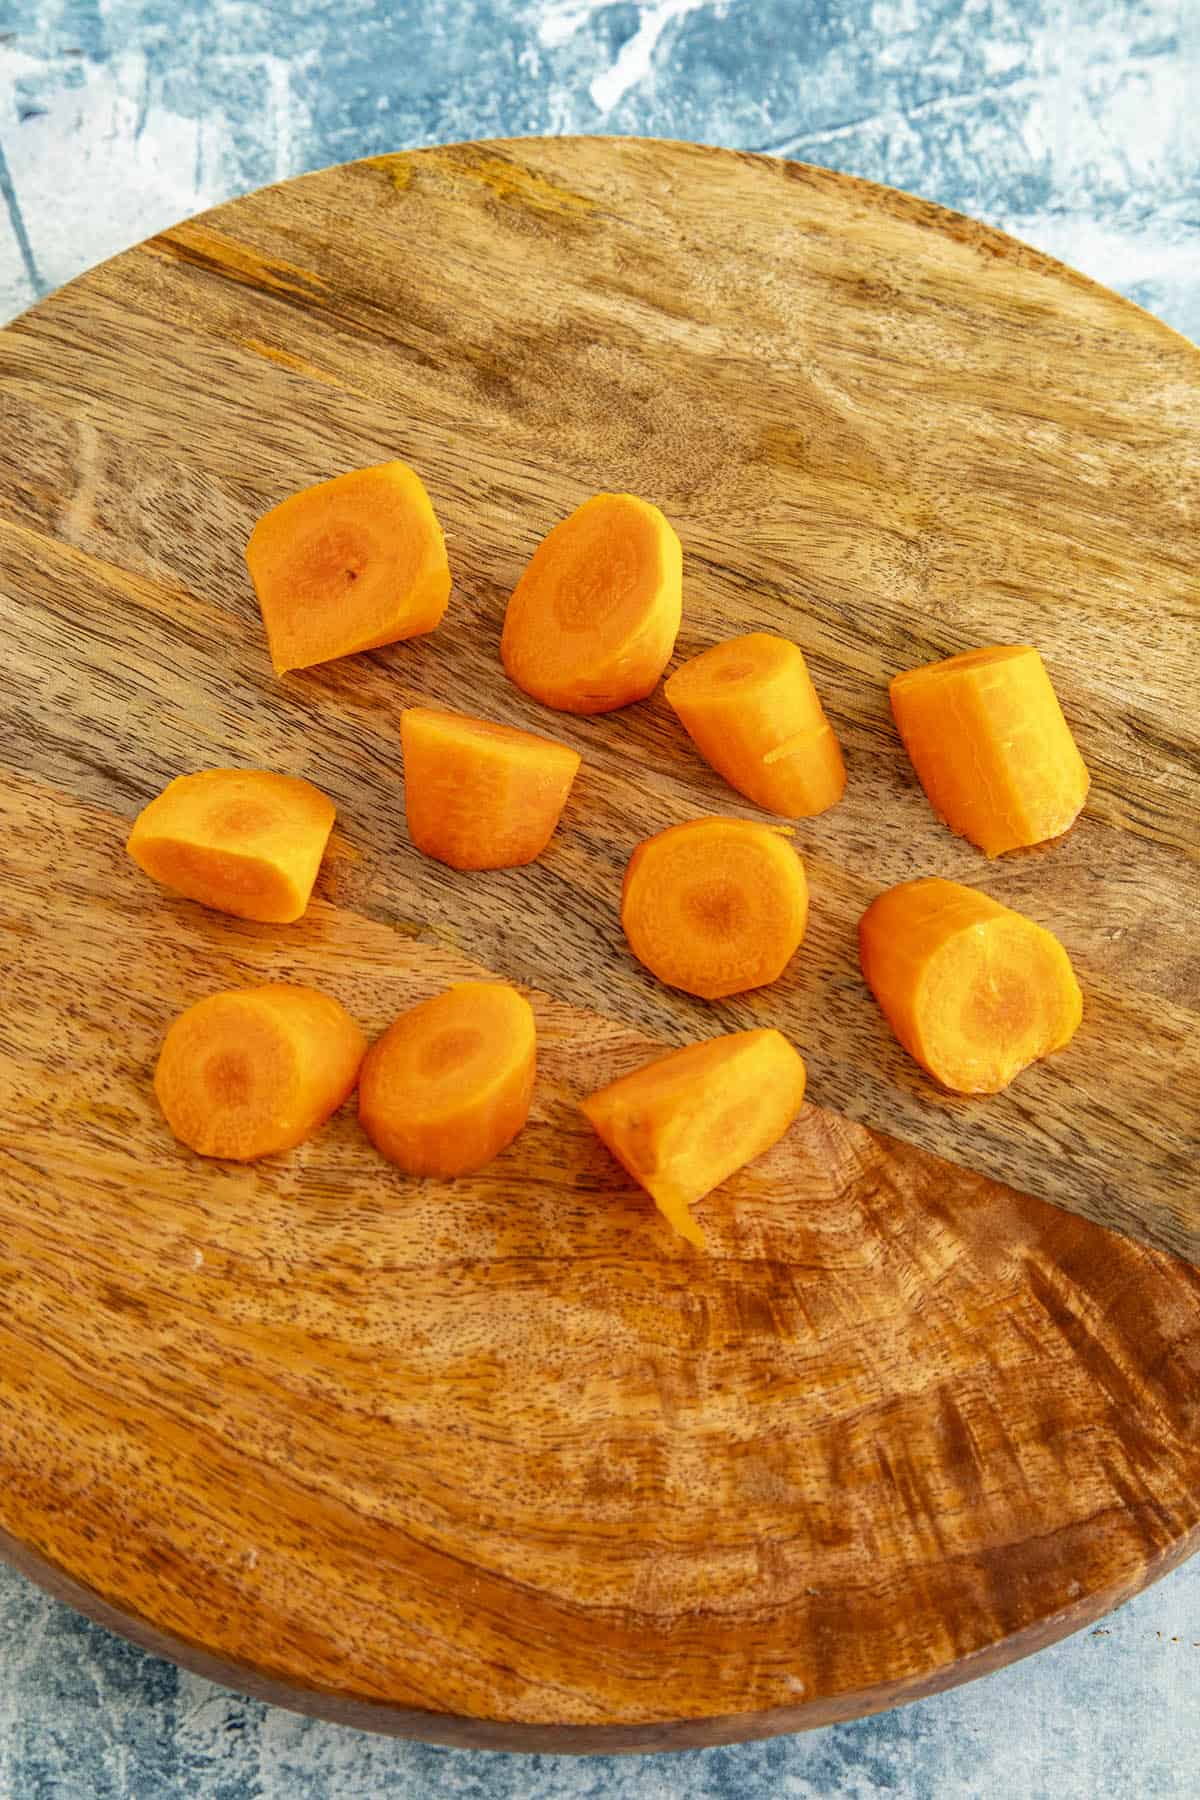 Rangiri cut carrots for making Japanese Curry